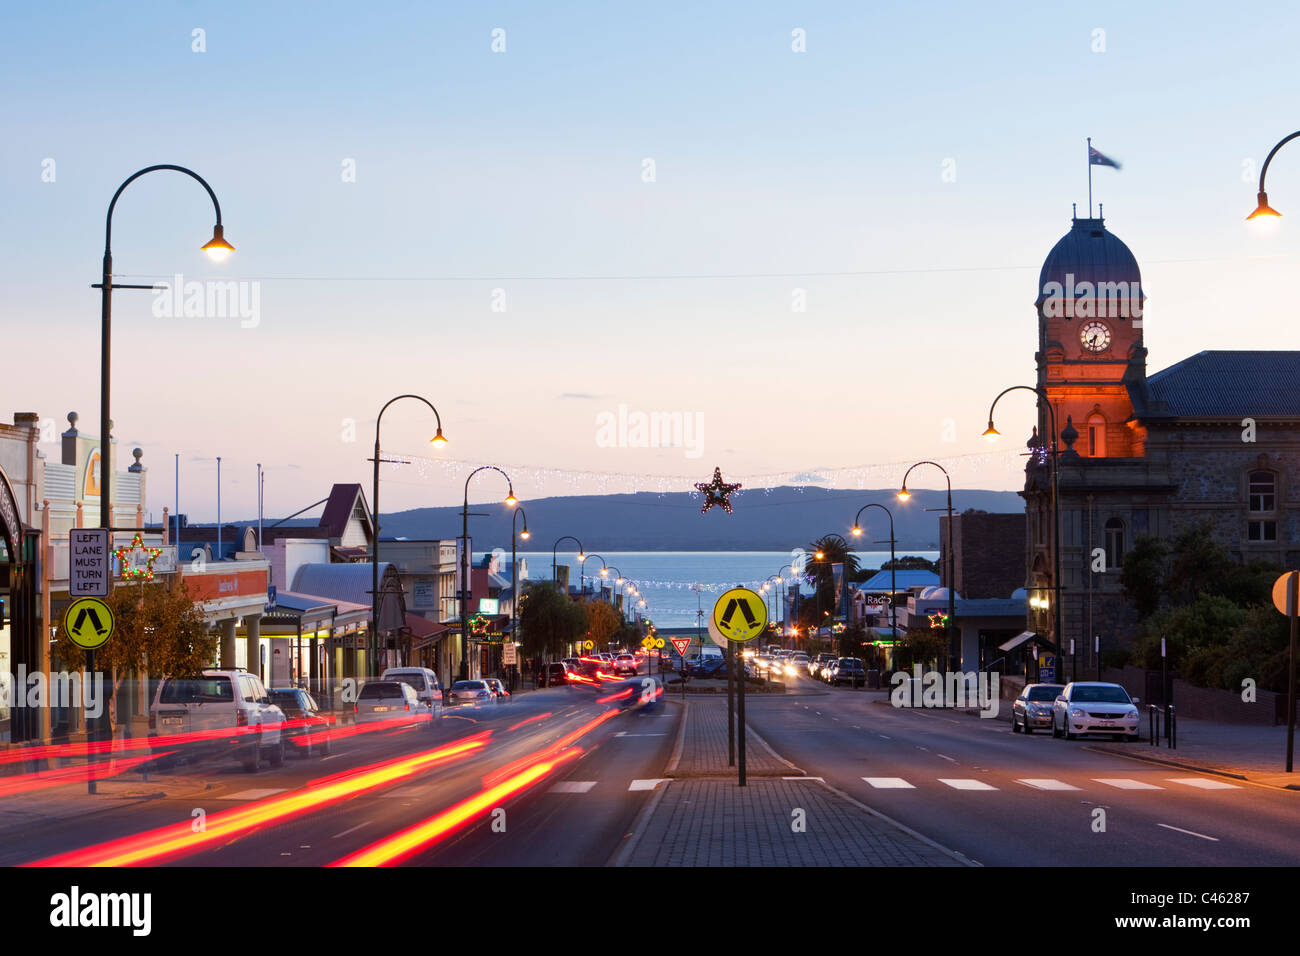 Études de bip20 - Page 8 View-of-town-hall-and-york-street-at-dusk-albany-western-australia-C46287